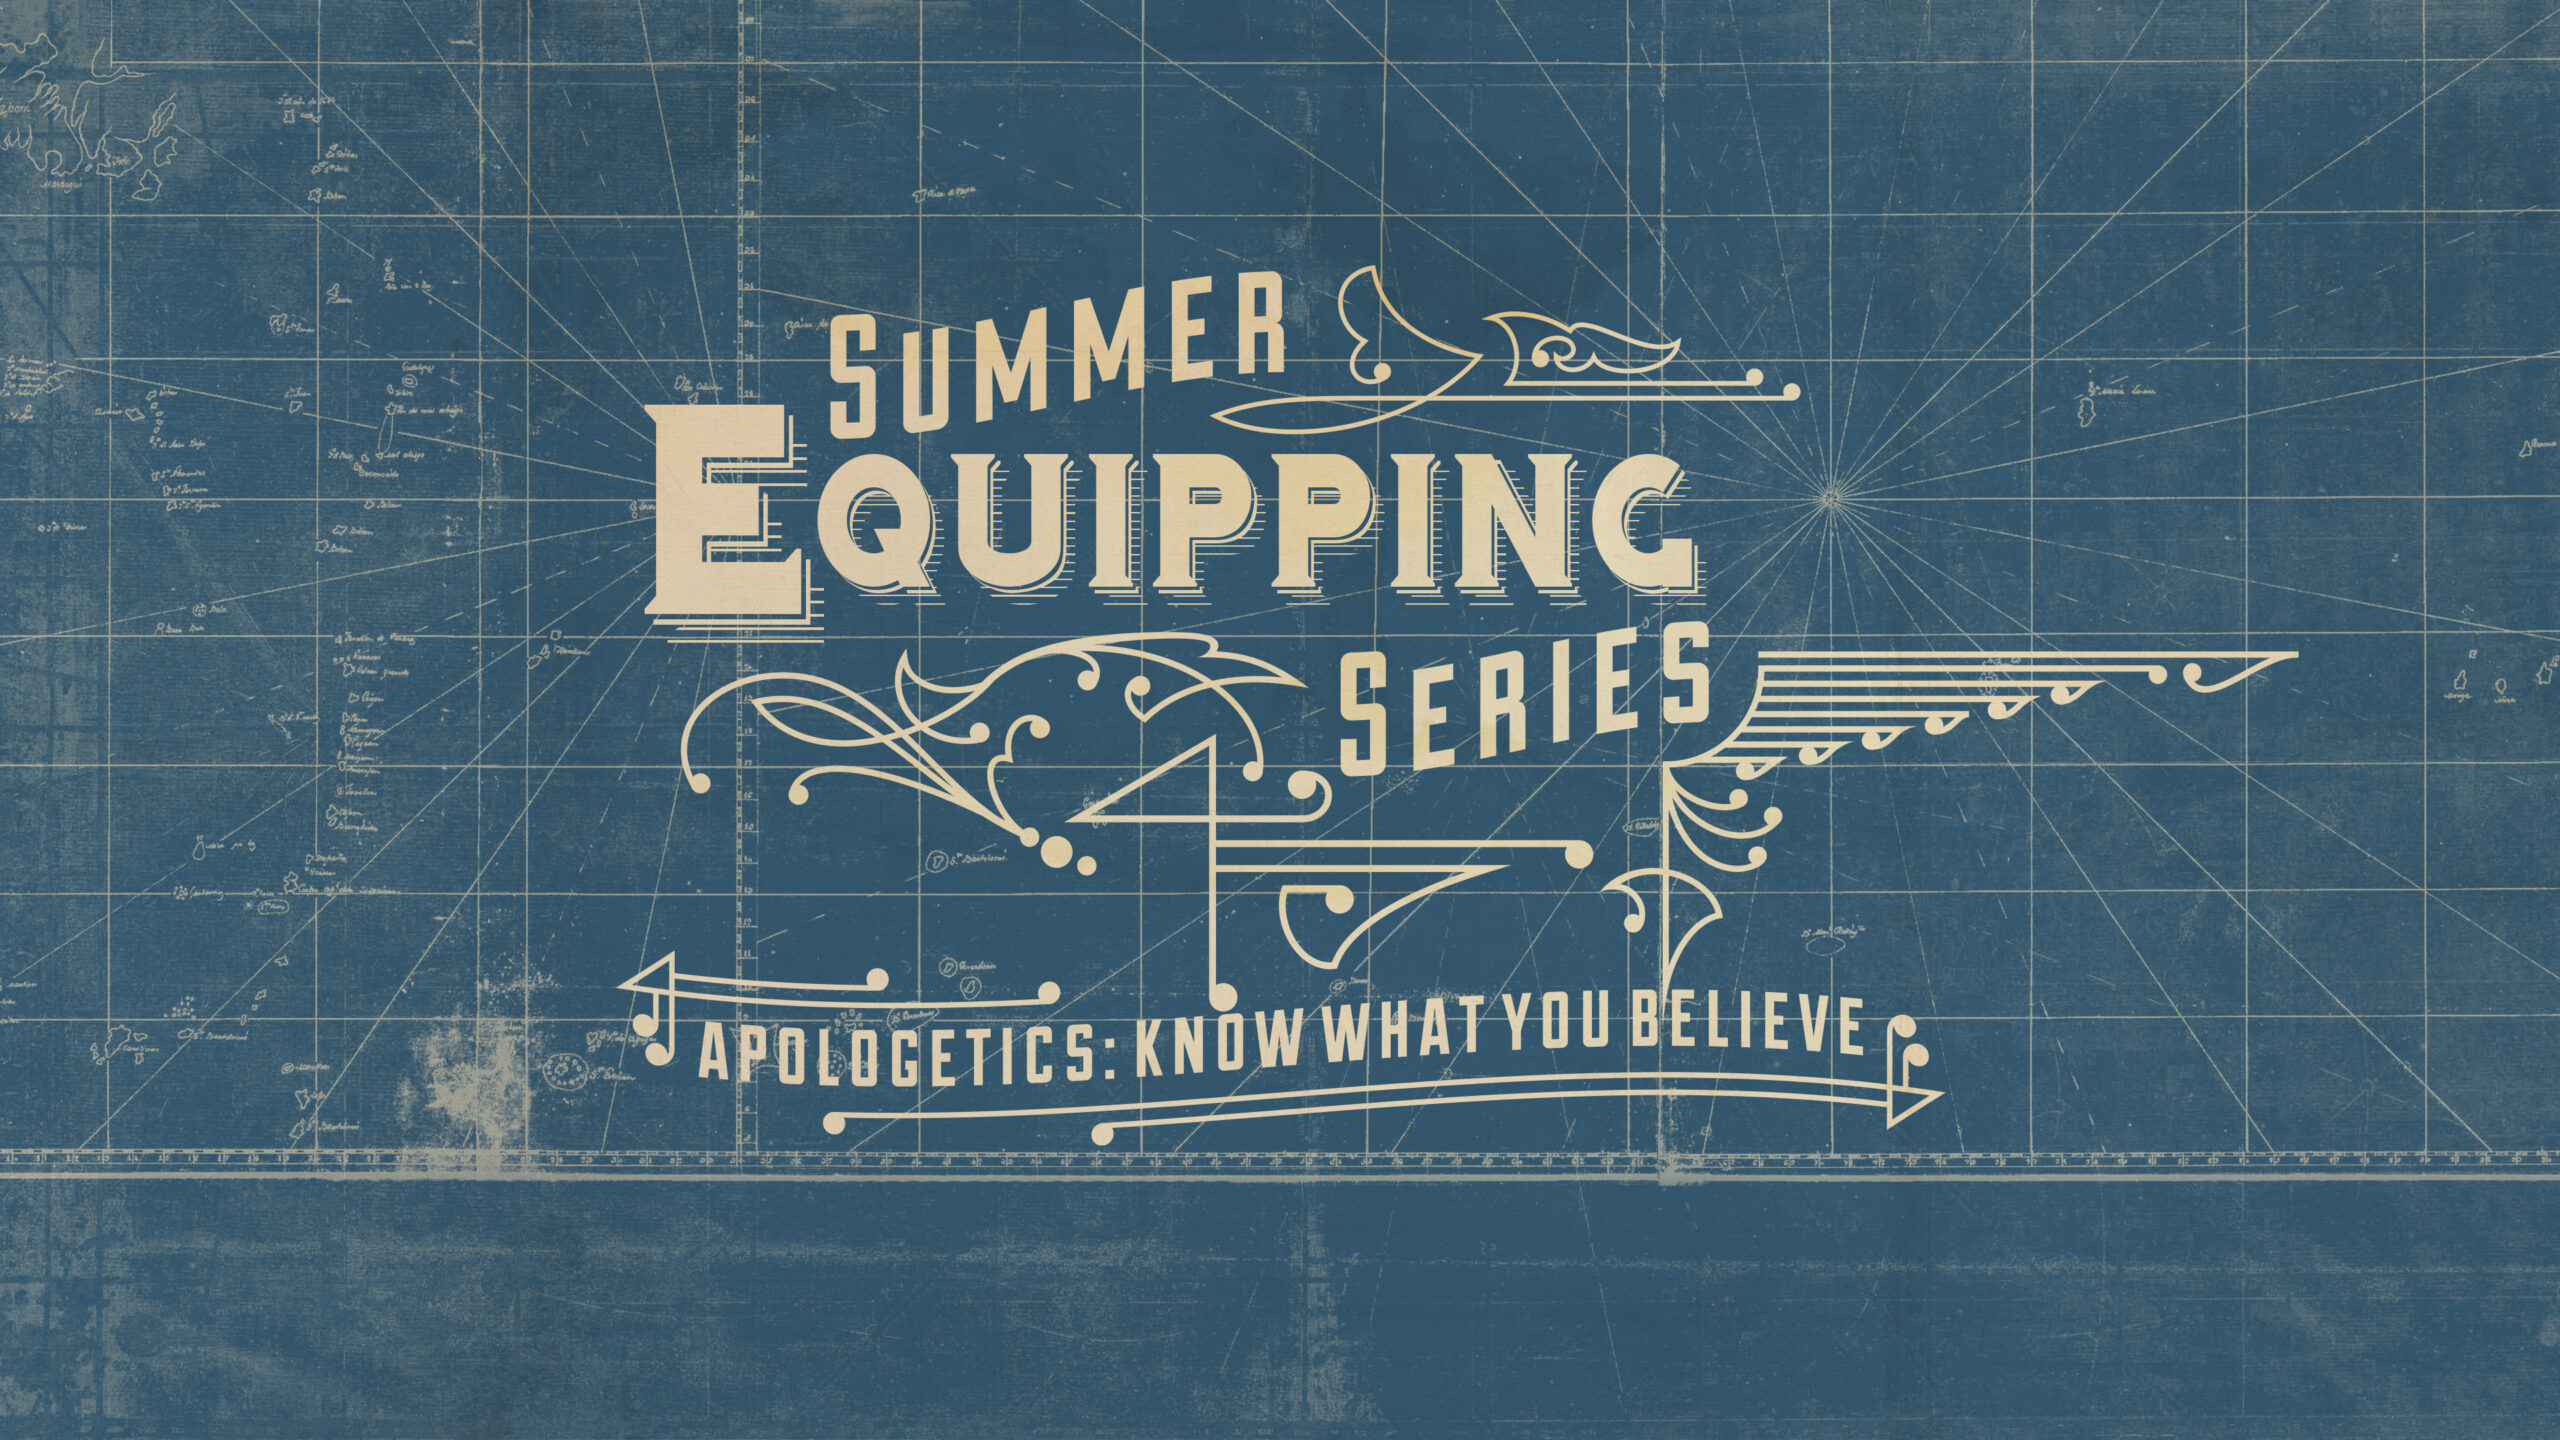 Summer Equipping Series: Apologetics graphic